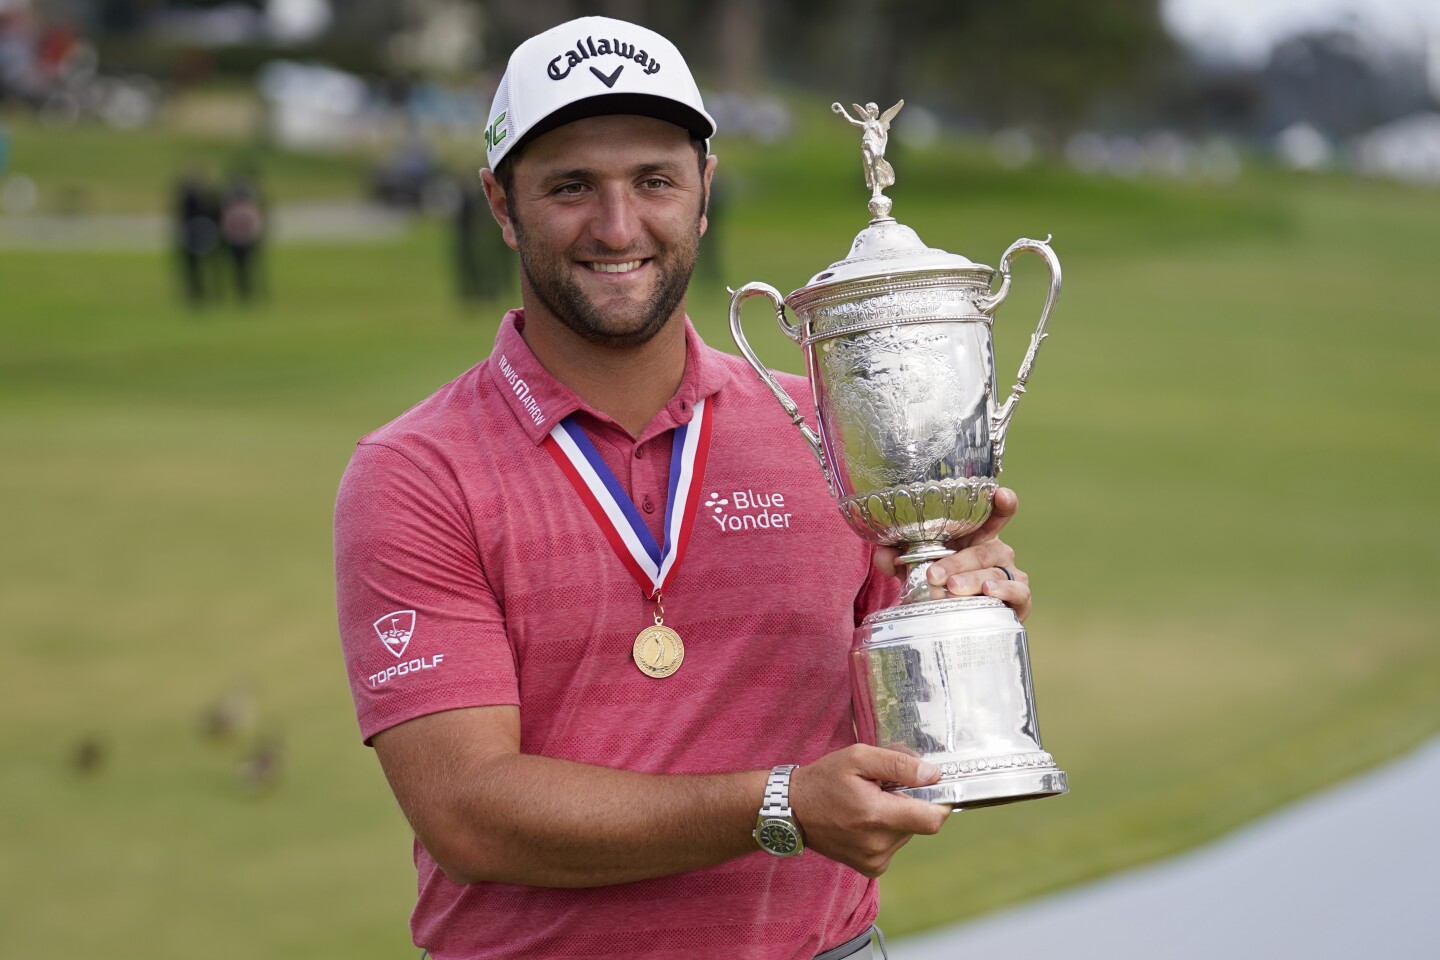 Jon Rahm, of Spain, holds the champions trophy for photographers after the final round of the U.S. Open Golf Championship, Sunday, June 20, 2021, at Torrey Pines Golf Course in San Diego. (AP Photo/Marcio Jose Sanchez)